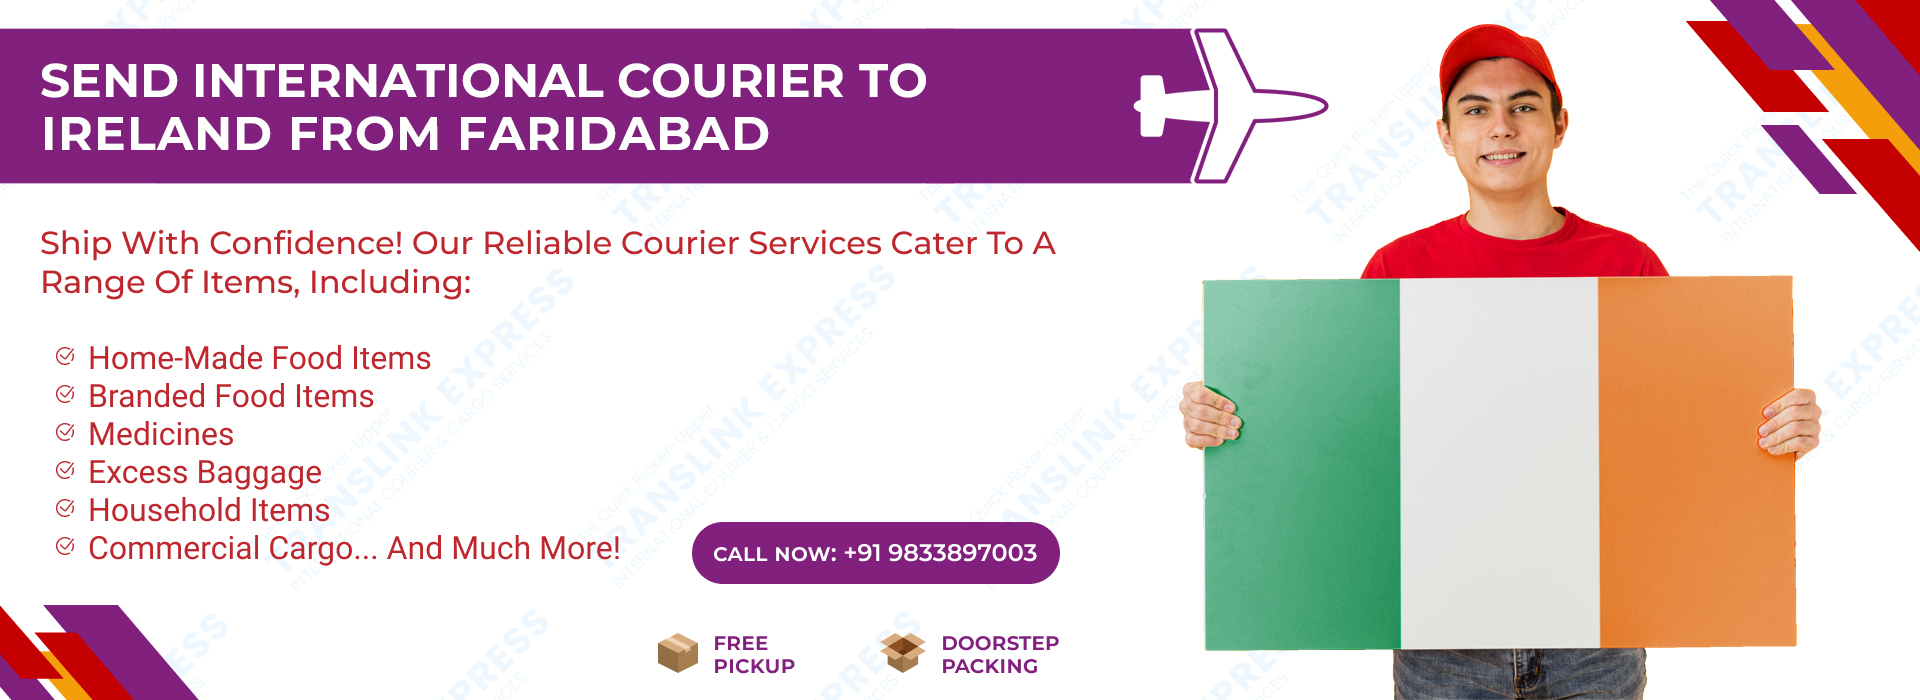 Courier to Ireland From Faridabad